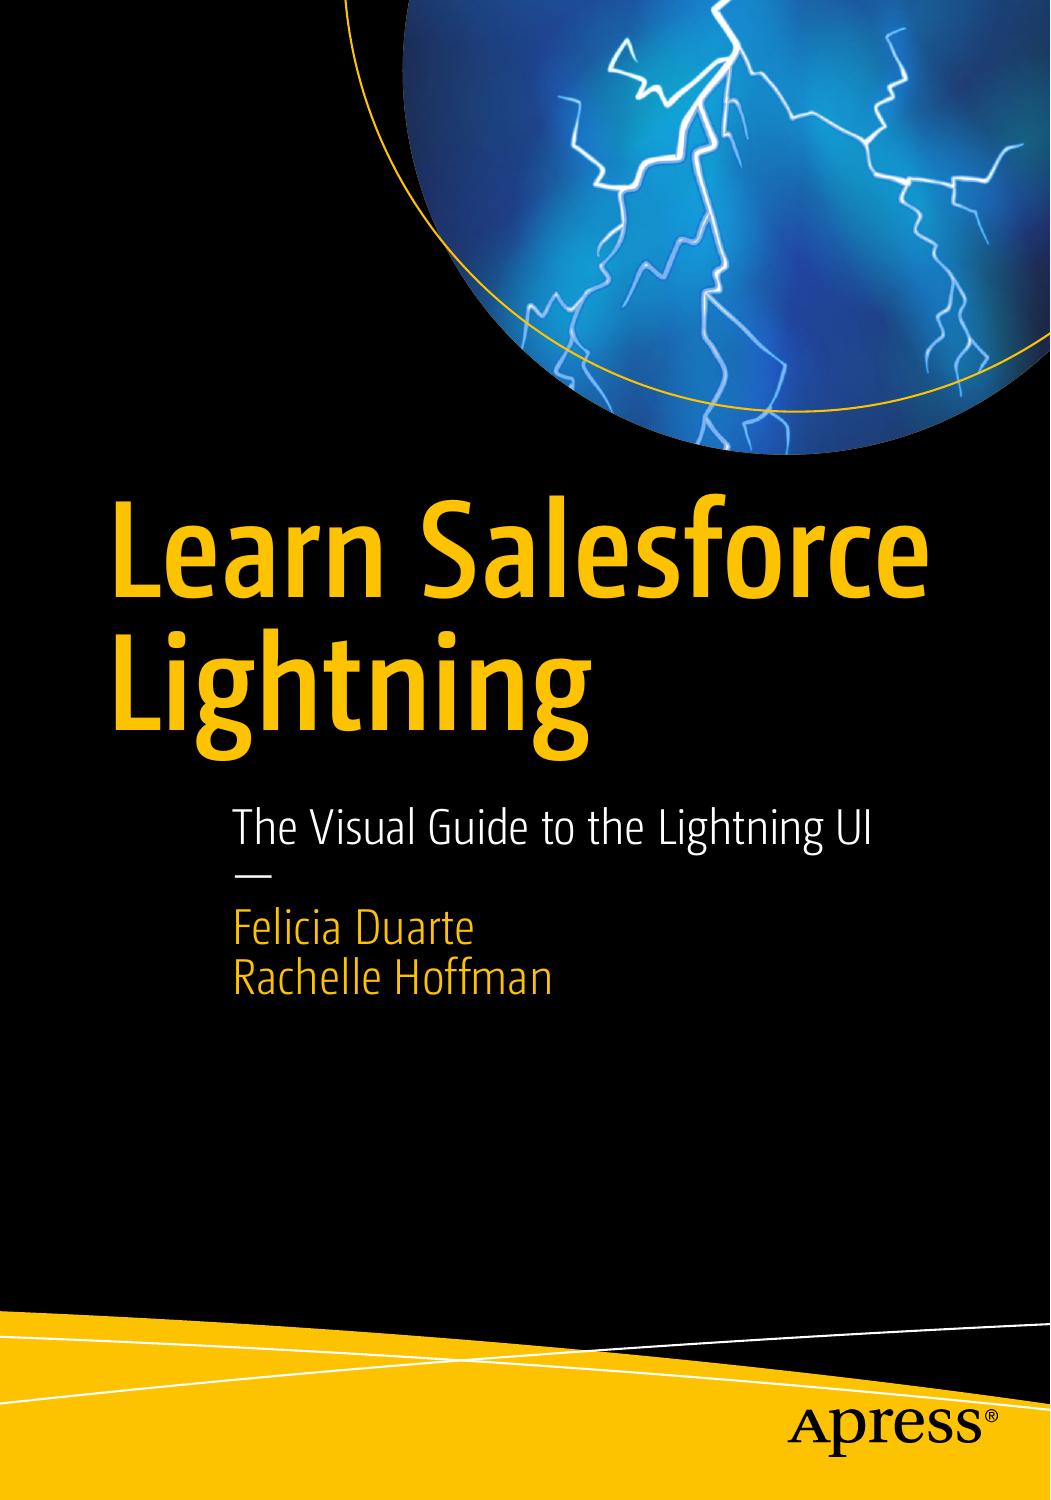 Learn Salesforce Lightning The Visual Guide to the Lightning 2018